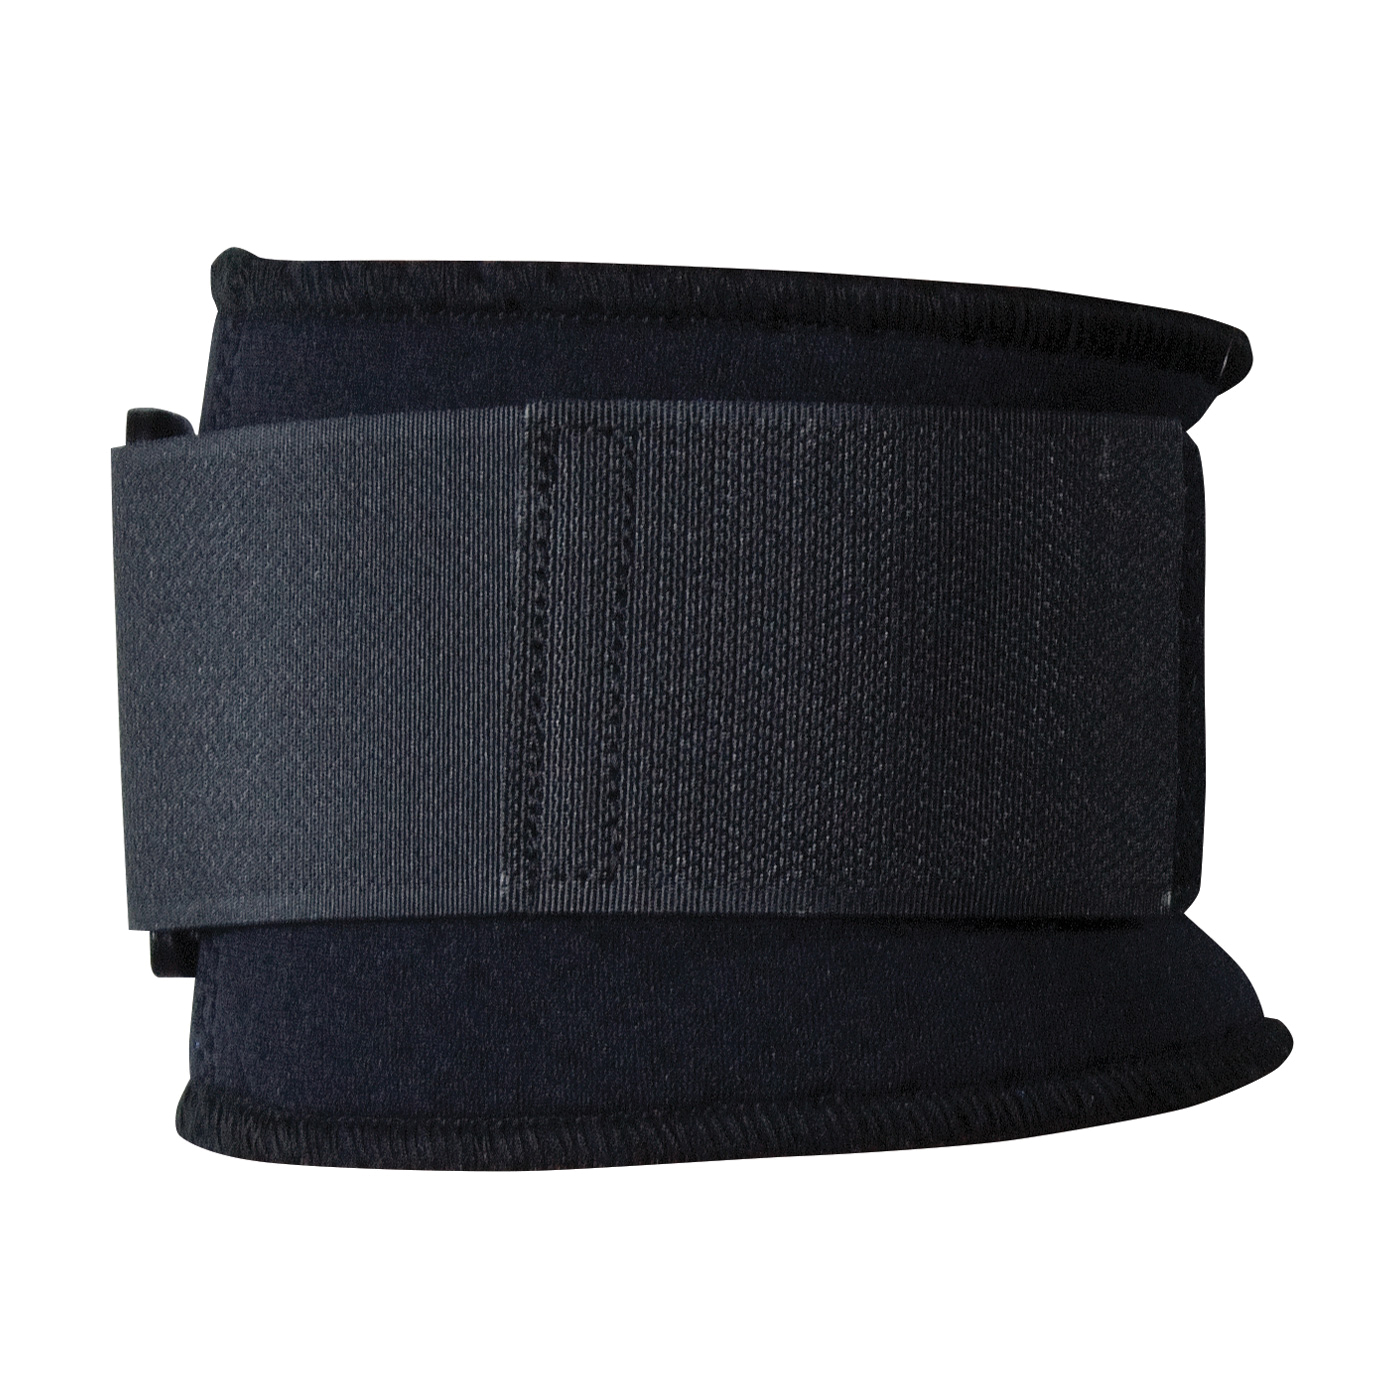 PIP® 290-9000M Ambidextrous Elbow Support Wrap, M, Terry Lined Neoprene/Nylon, Black, Hook and Loop Closure